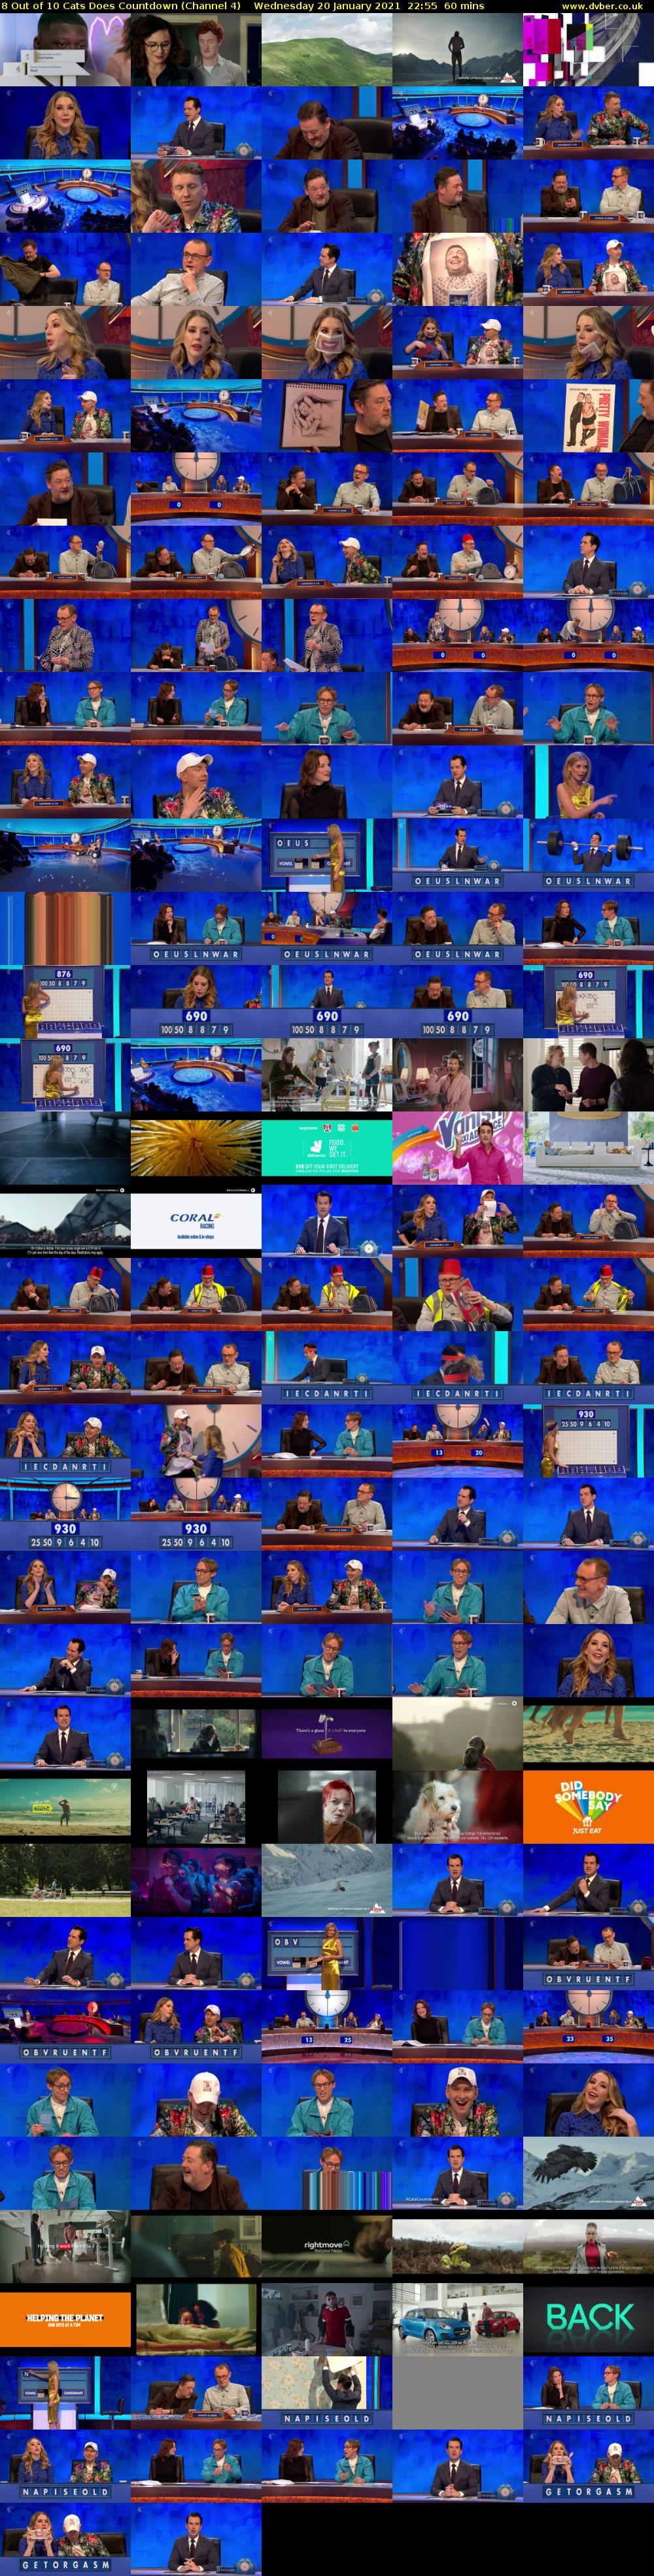 8 Out of 10 Cats Does Countdown (Channel 4) Wednesday 20 January 2021 22:55 - 23:55